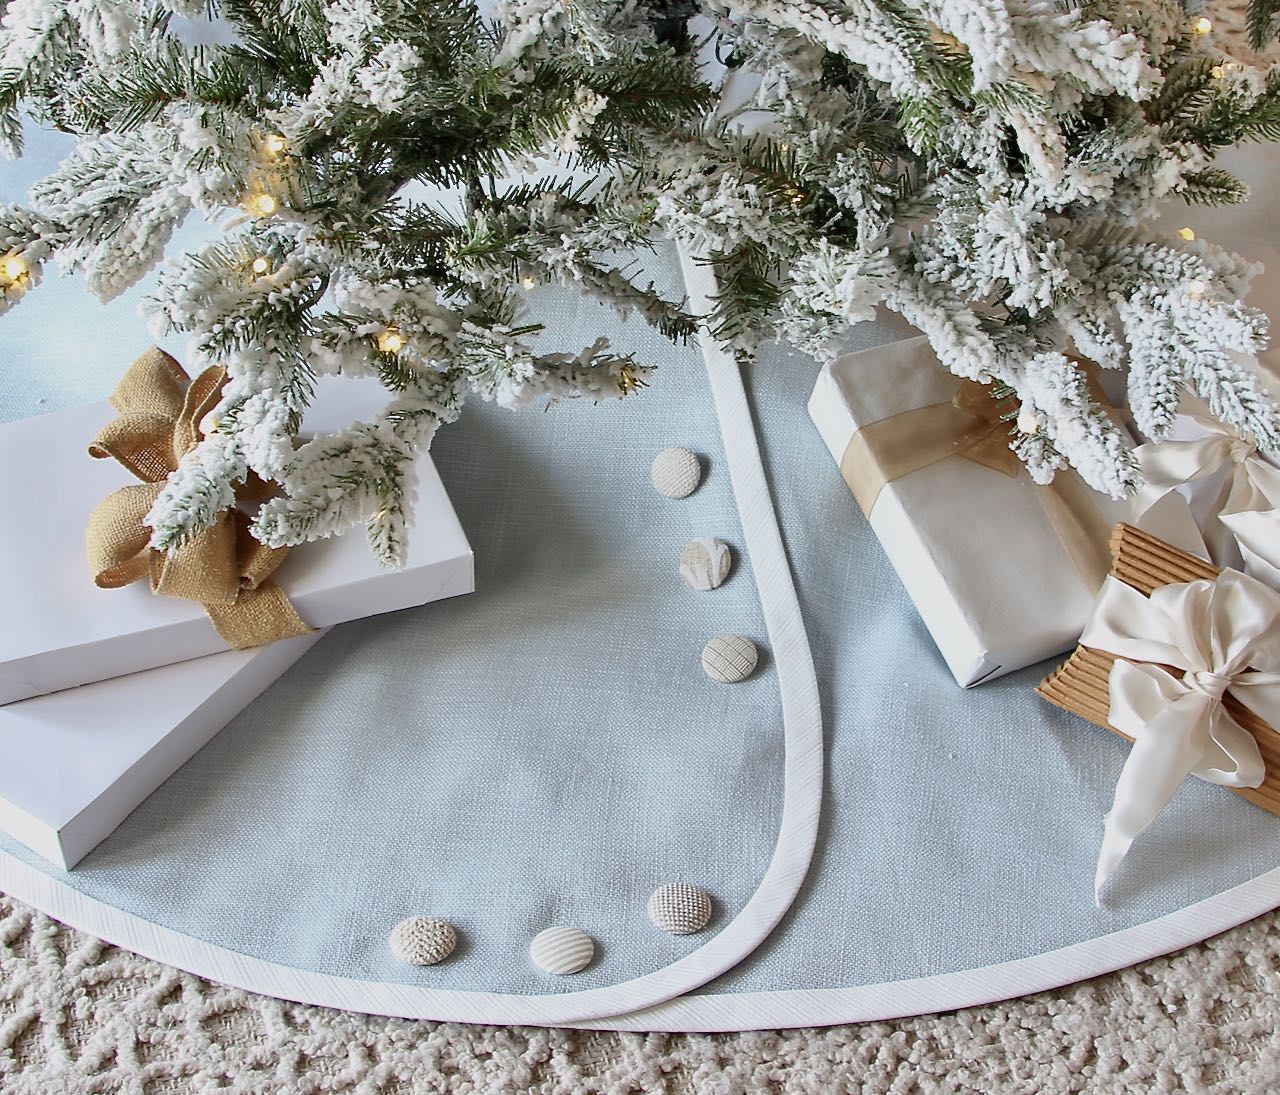 Pale blue linen trtee skirt banded. in white with kaki and white buttons under a flocked Christmas tree